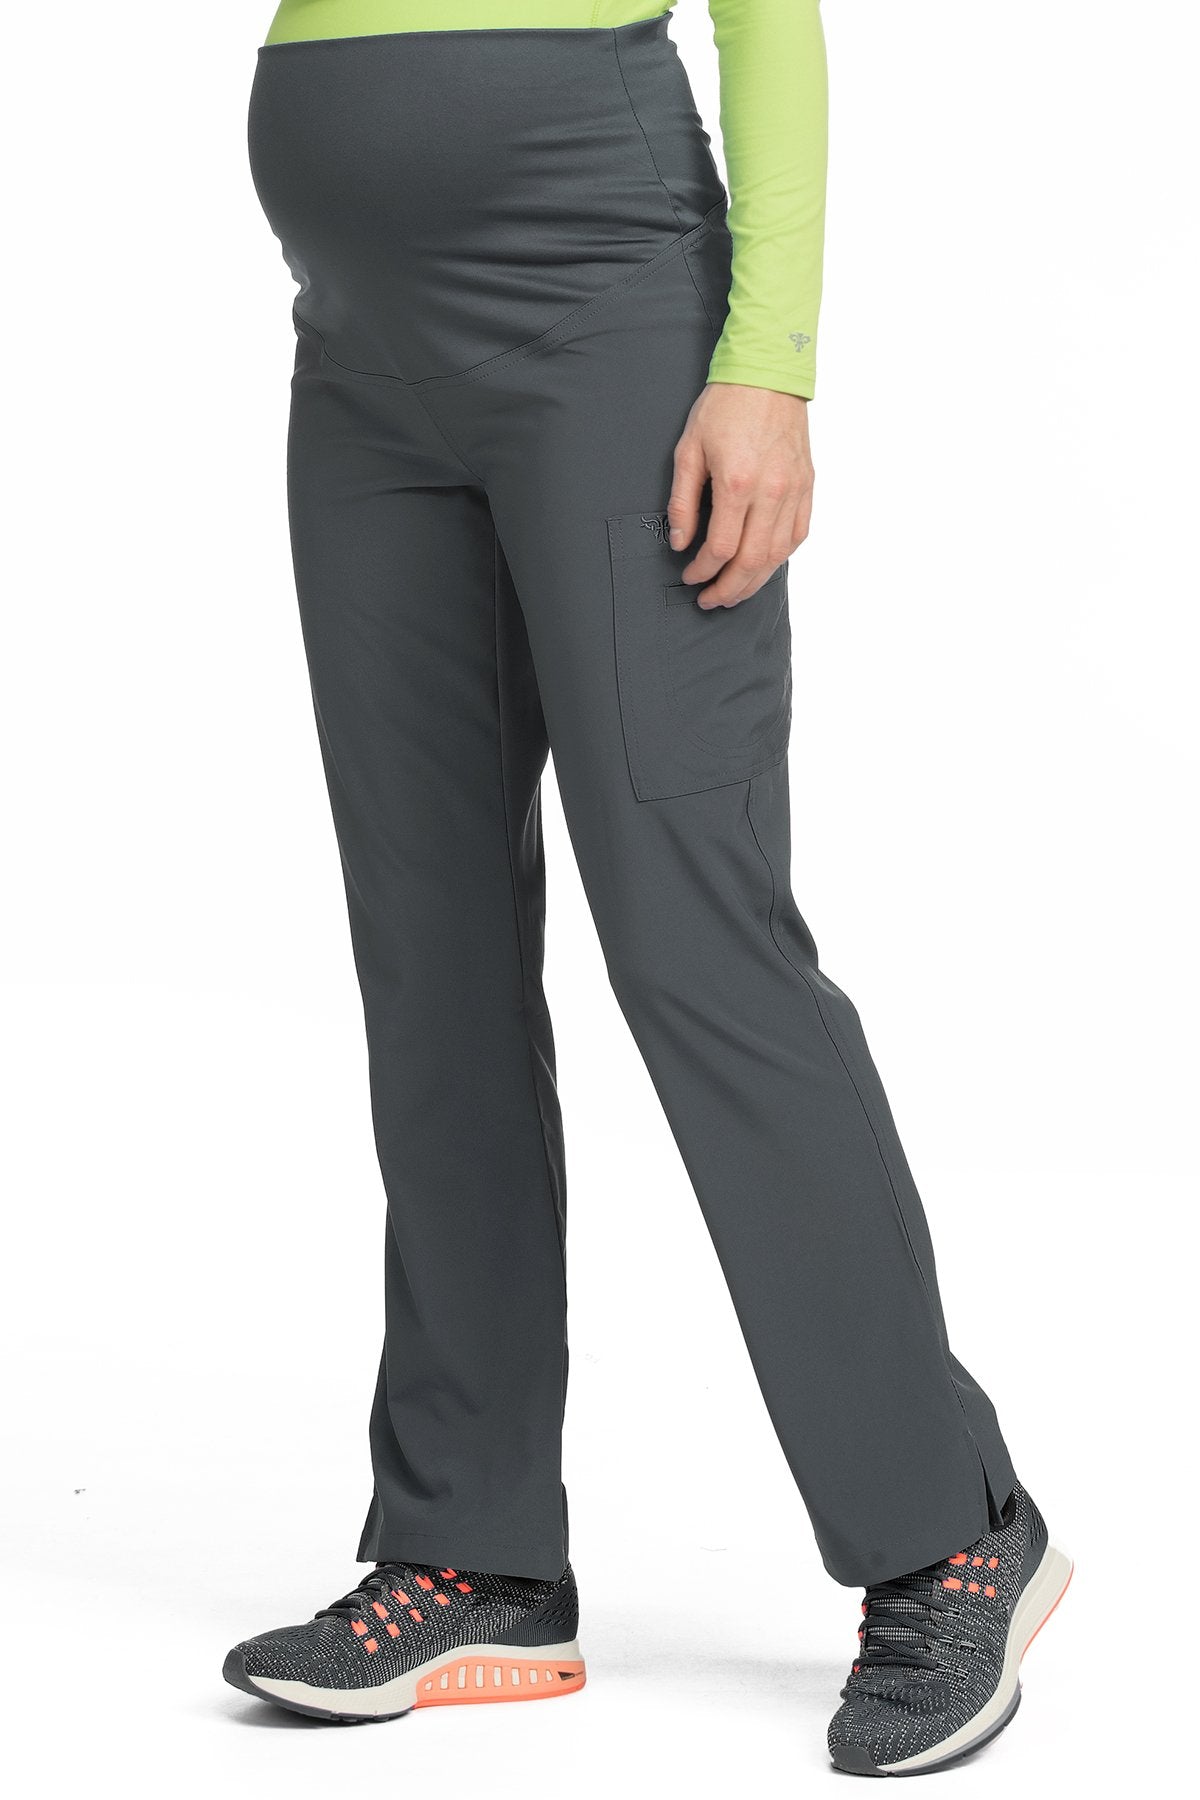 Med Couture Activate Maternity Pant Pewter